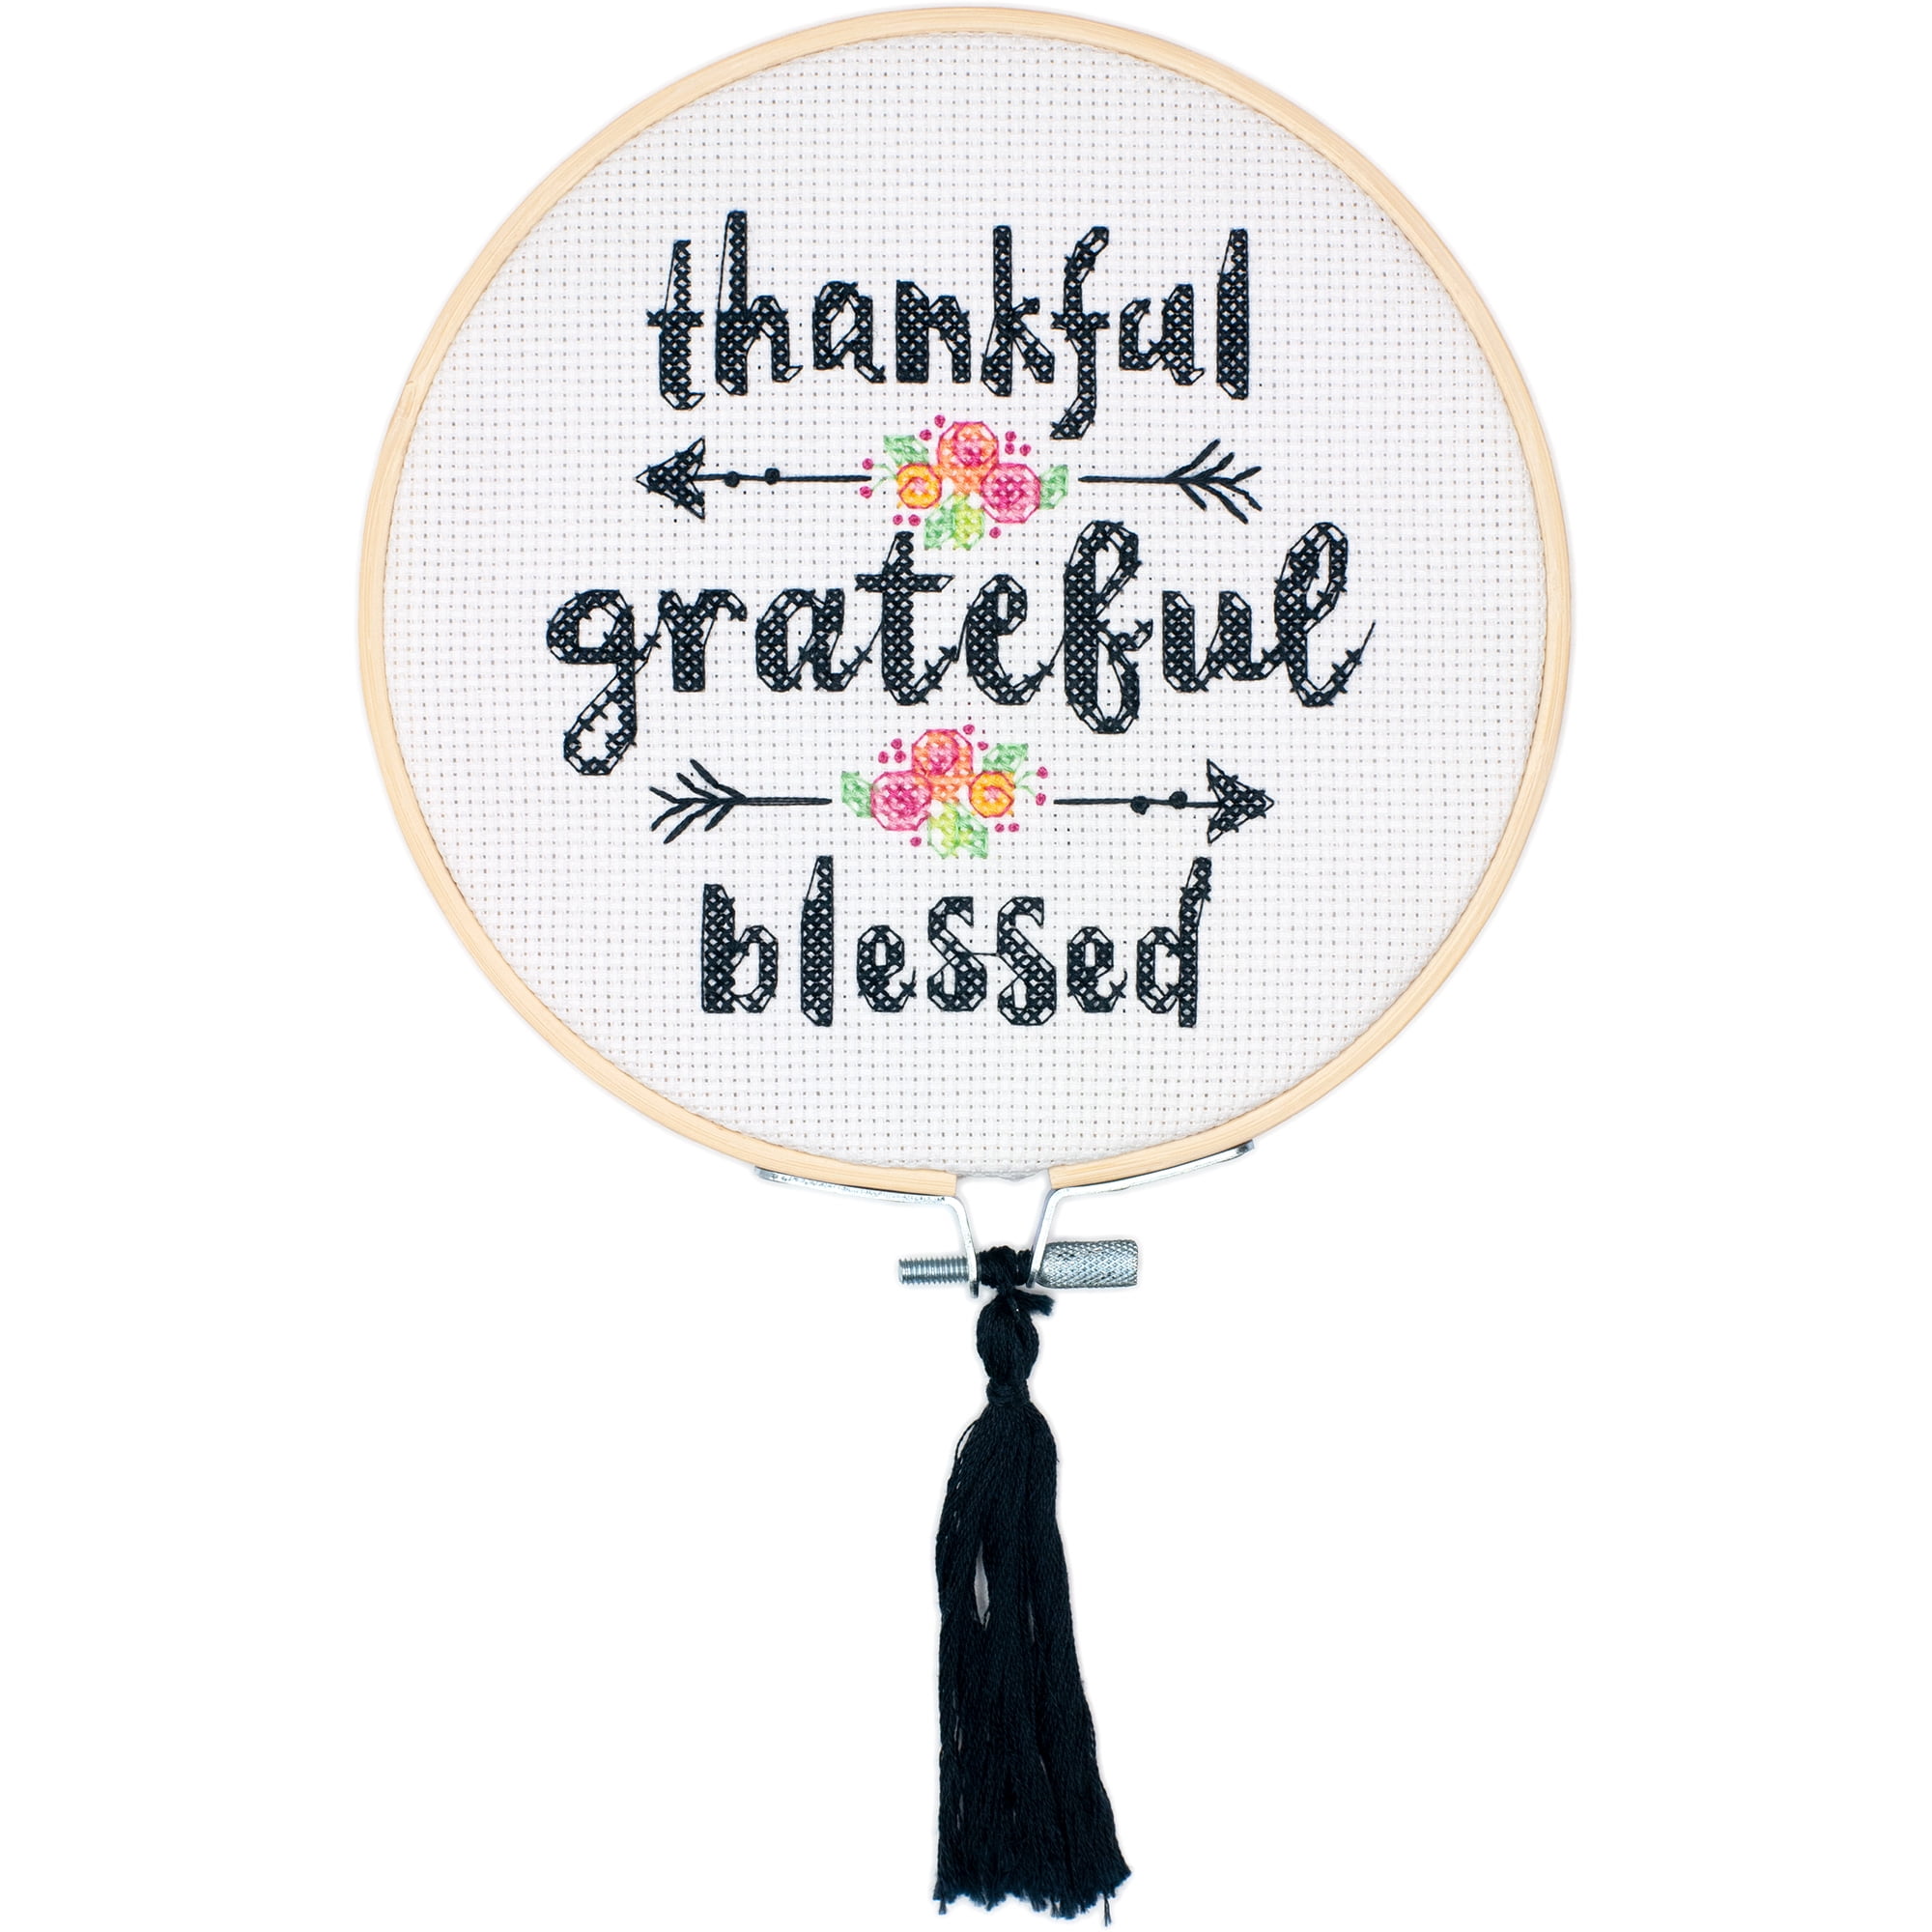 Simplicity Thankful Stitched Home Dcor